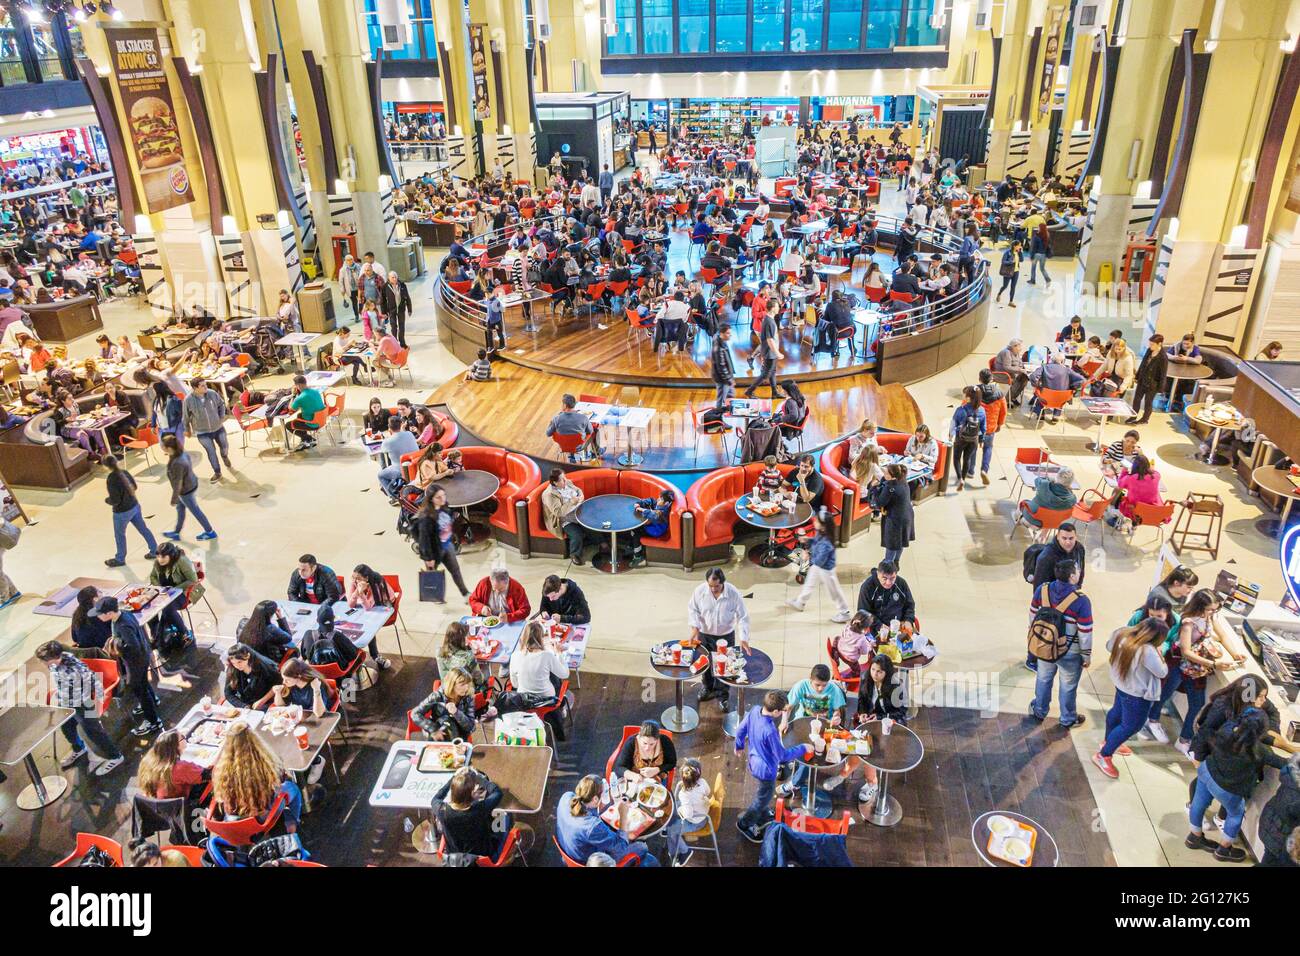 Argentina Buenos Aires Abasto Shopping Mall atrium food court plaza crowded overhead view families restaurant restaurants dining Stock Photo